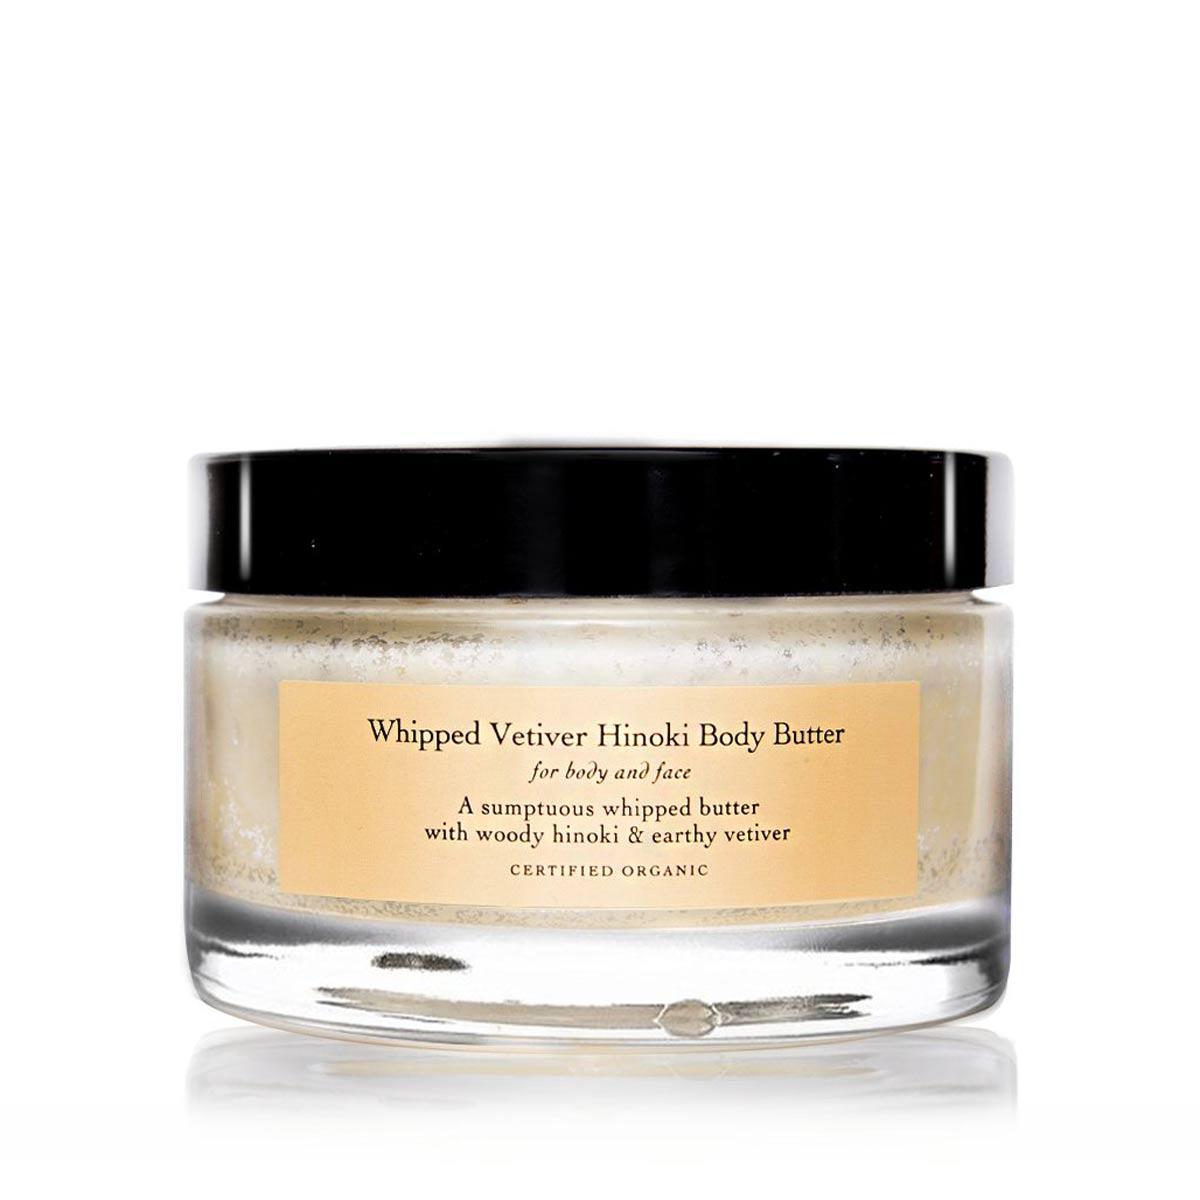 Primary image of Whipped Vetiver HInoki Body Butter